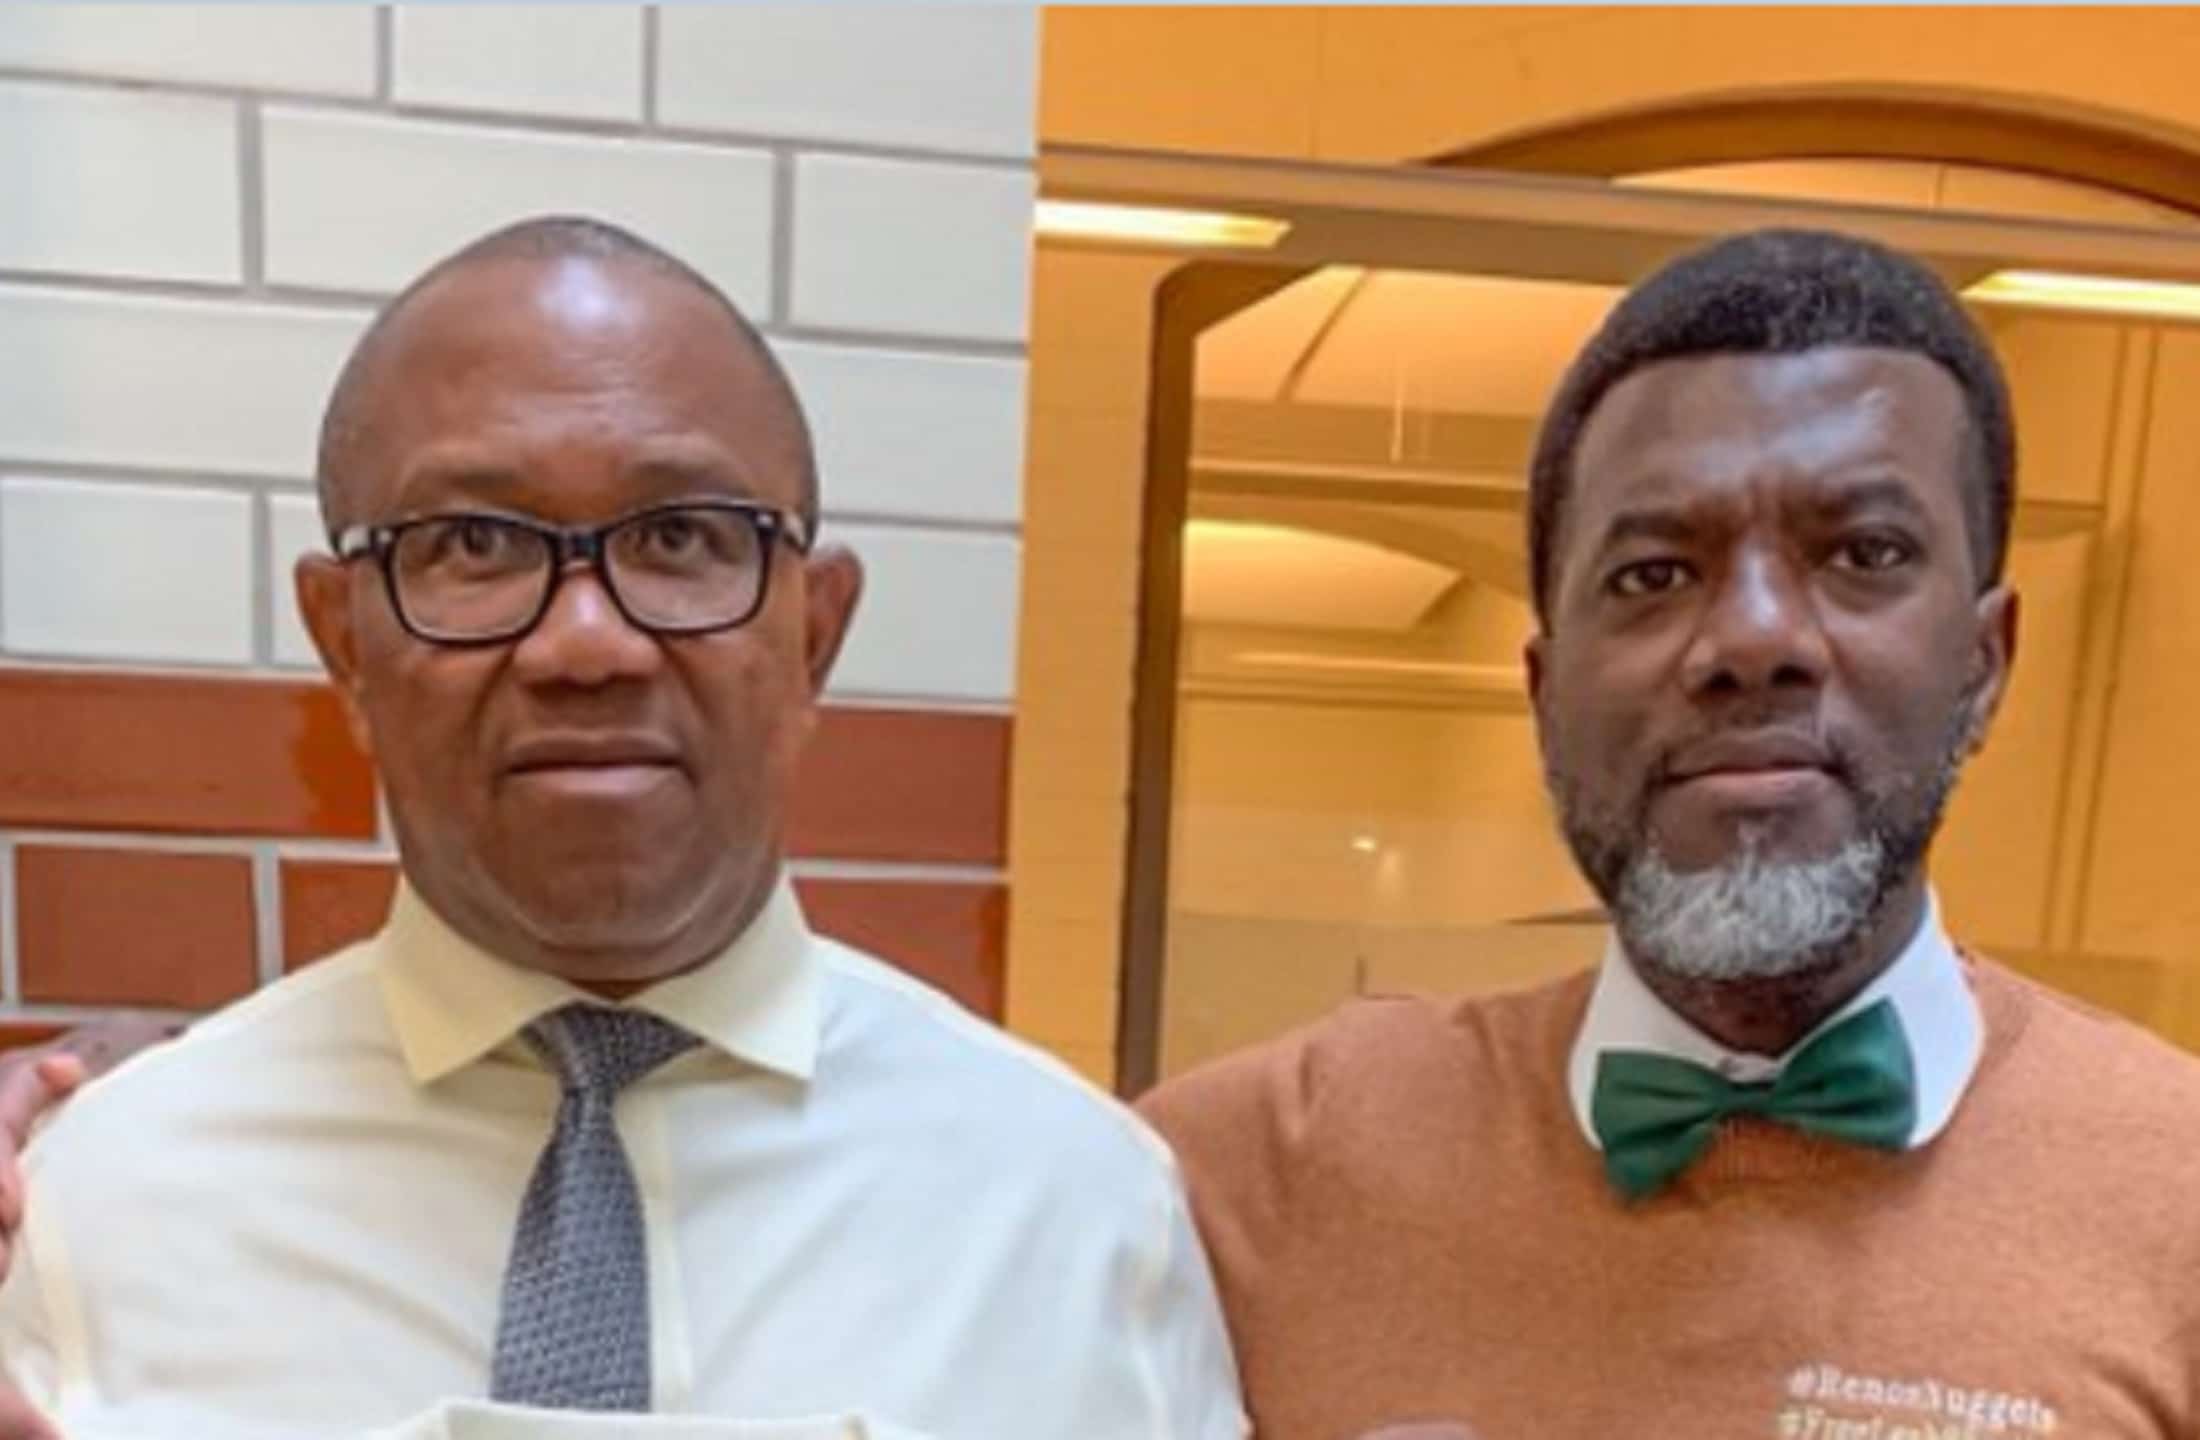 "Arrest Them, Nothing Will Happen" - Omokri Tells FG What To Do To Peter Obi And Datti-Ahmed